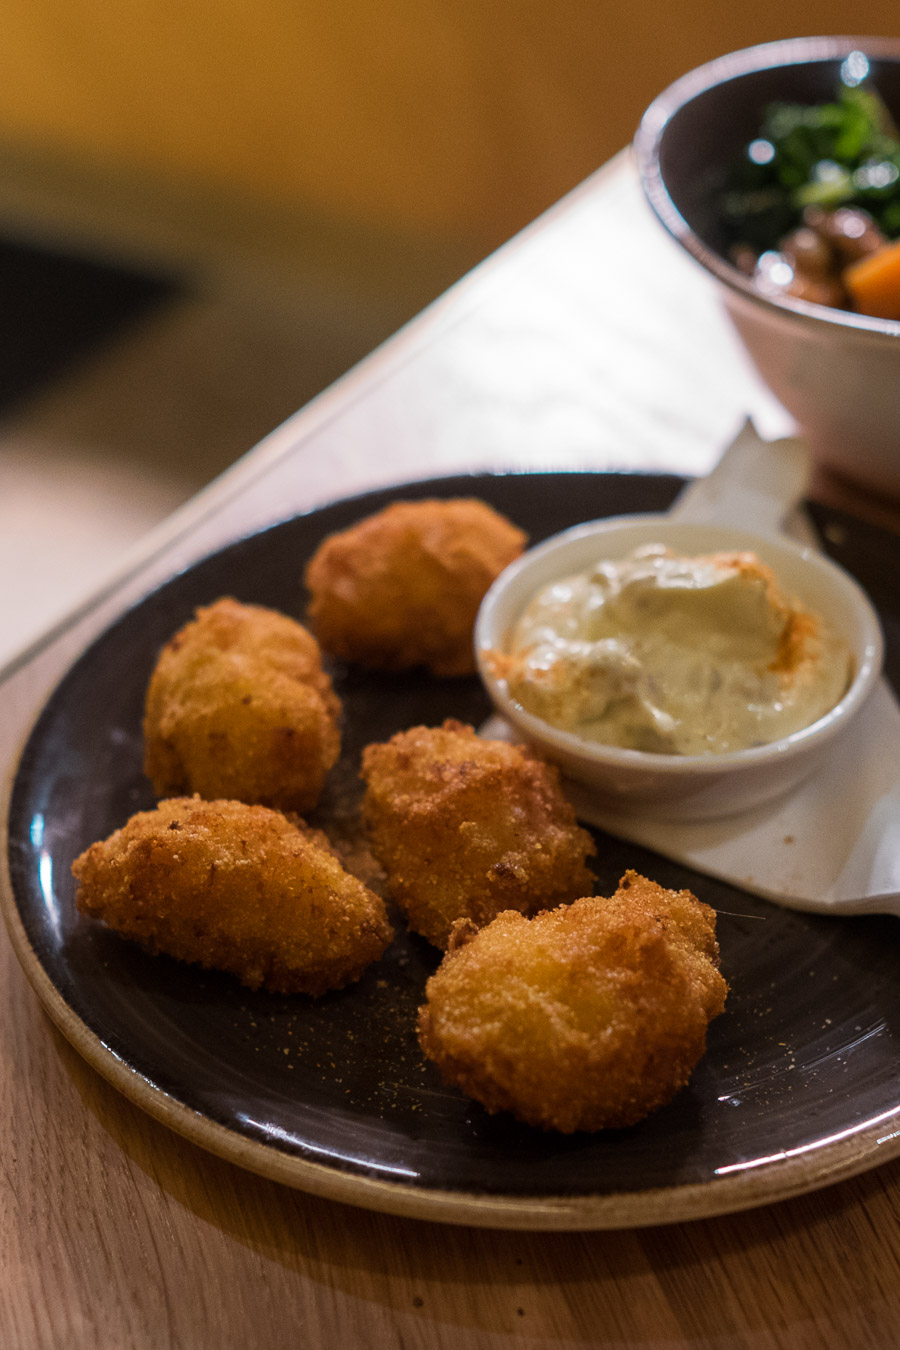 Hush puppies (AU$9) - made with cornmeal, bacon and cheddar, served with baconaise.